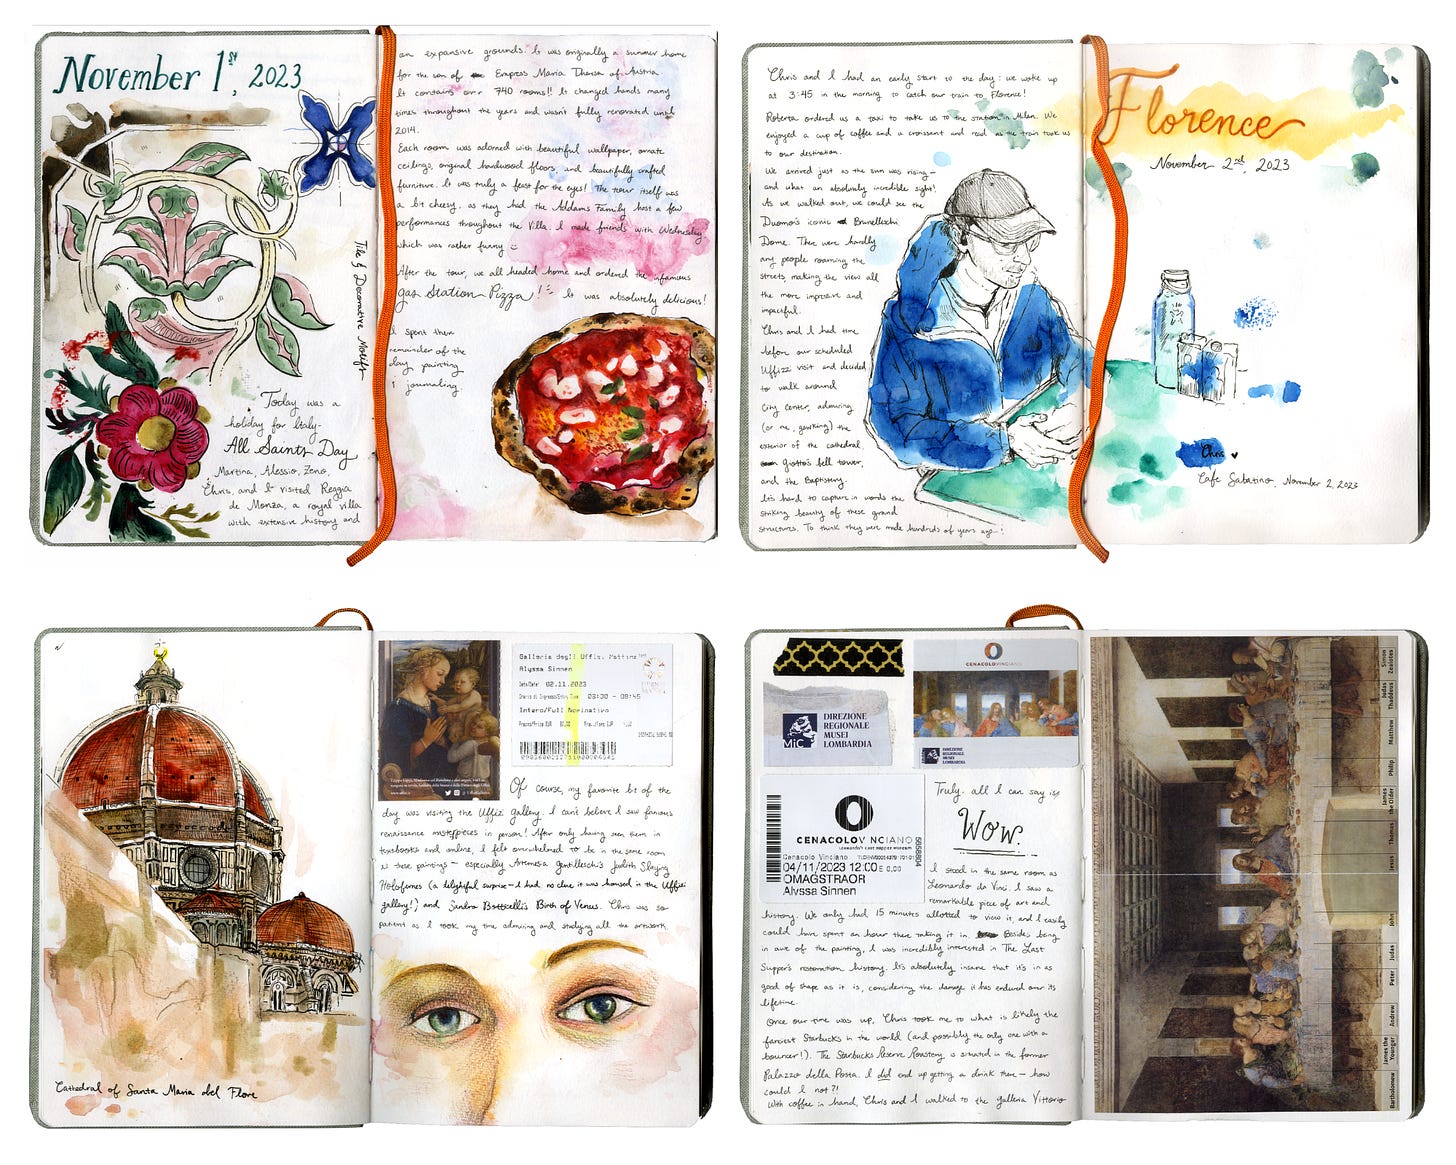 A photo collage of the artists's sketchbook, featuring several spreads of her time in Italy. Each spread includes a mixed media drawing, ticket stubs, paper collage, and writing.